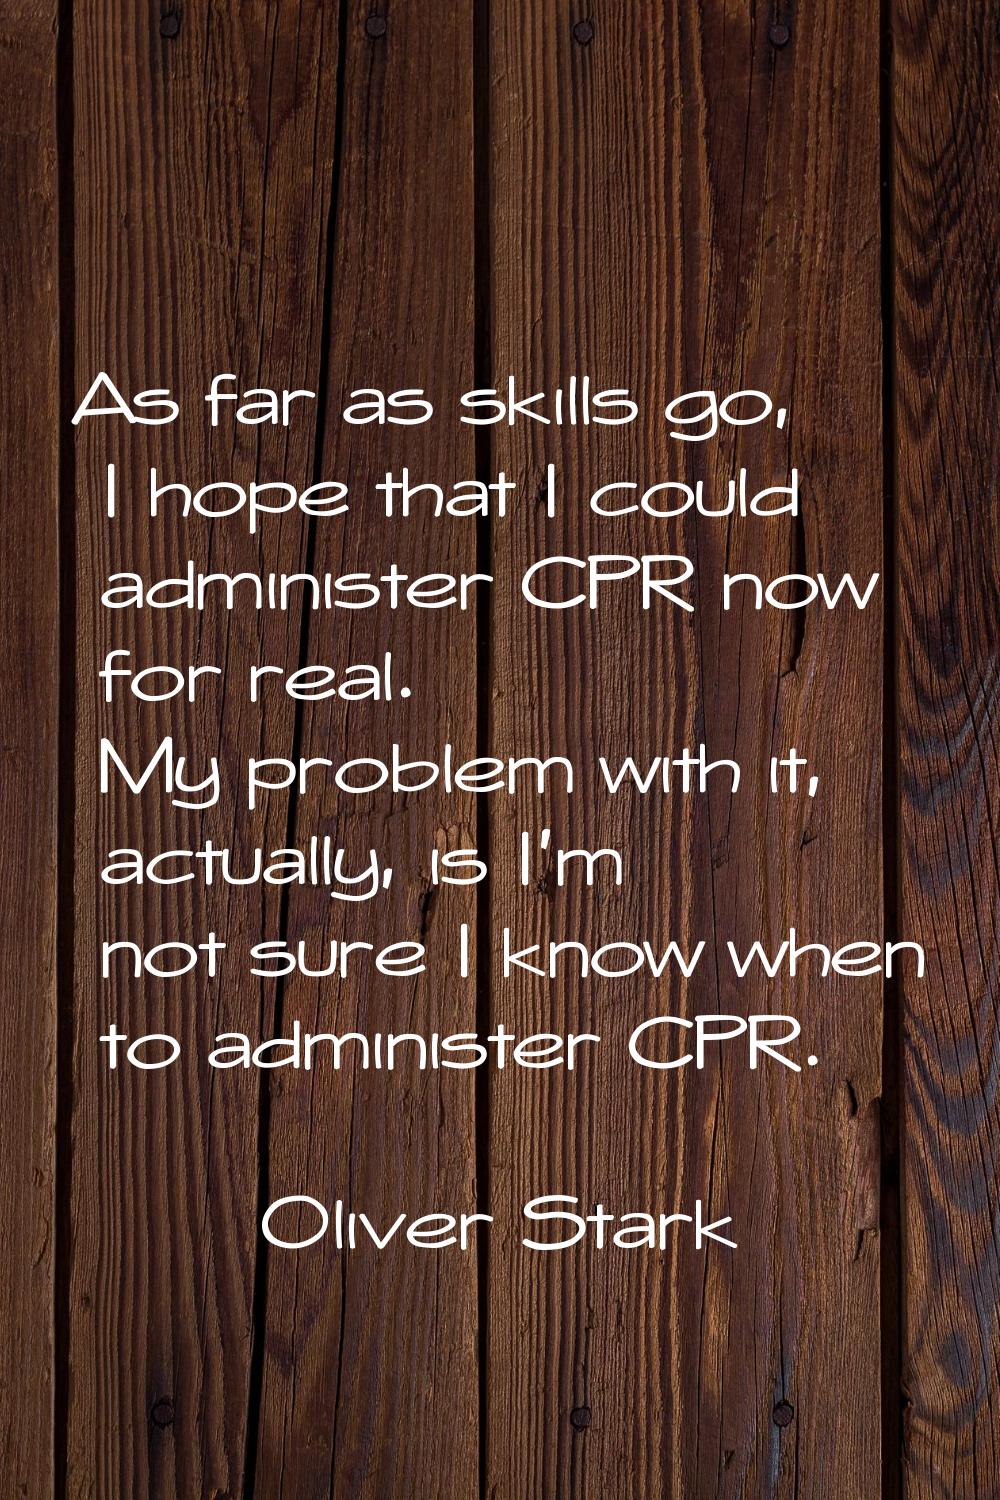 As far as skills go, I hope that I could administer CPR now for real. My problem with it, actually,